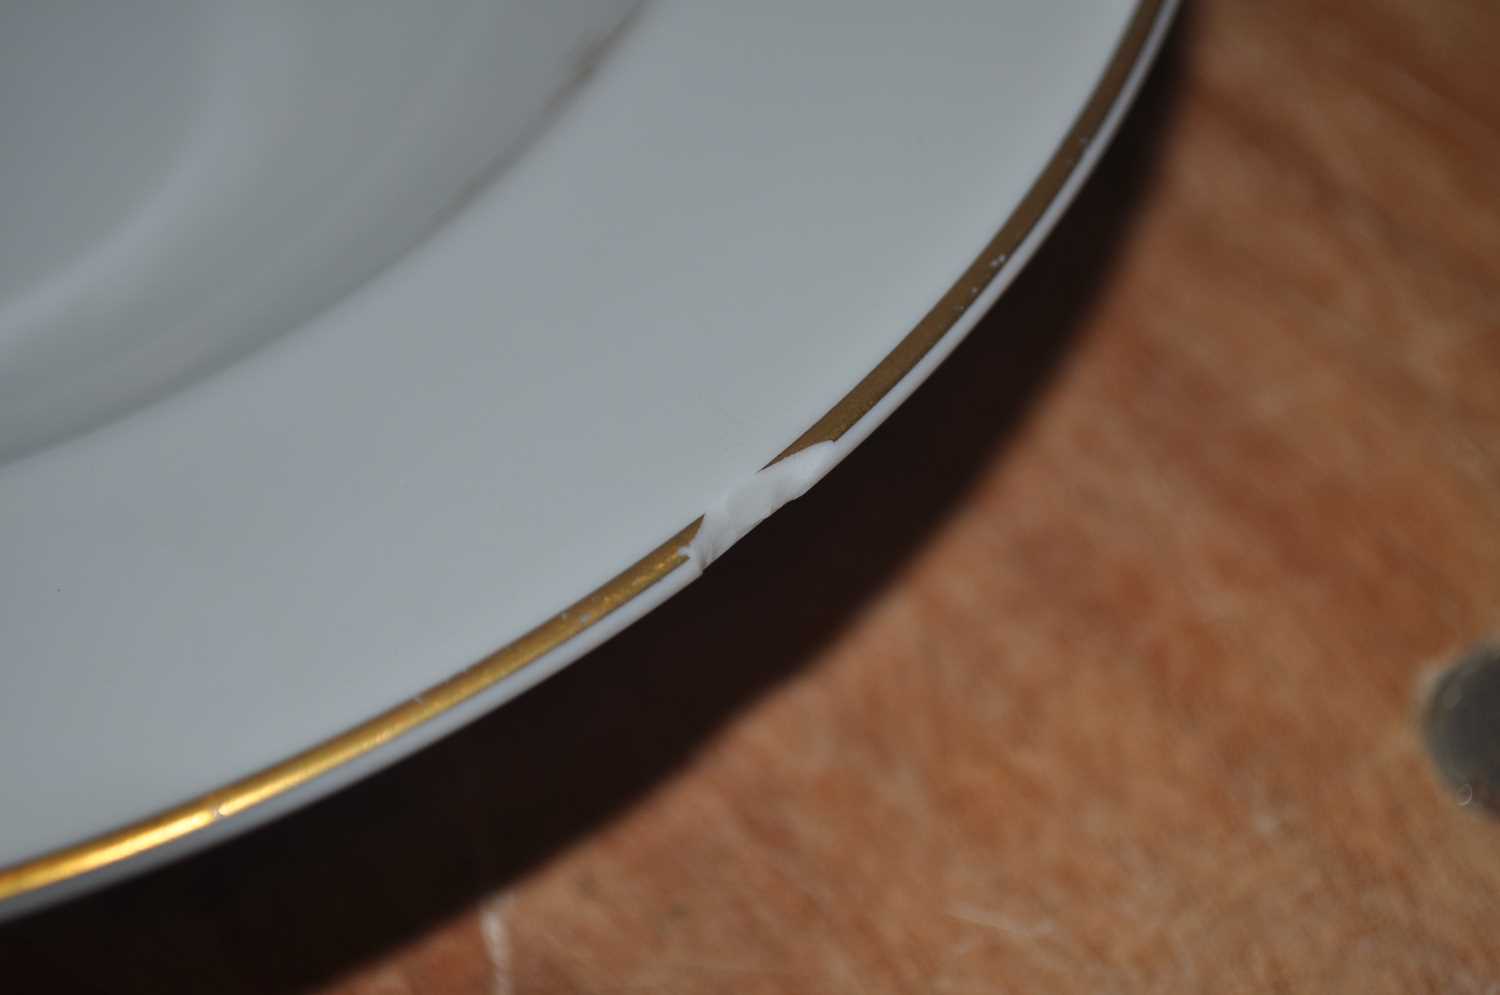 A Royal Doulton Citadel pattern porcelain dinner serviceAll worn used and dirty. One soup plate with - Image 3 of 7